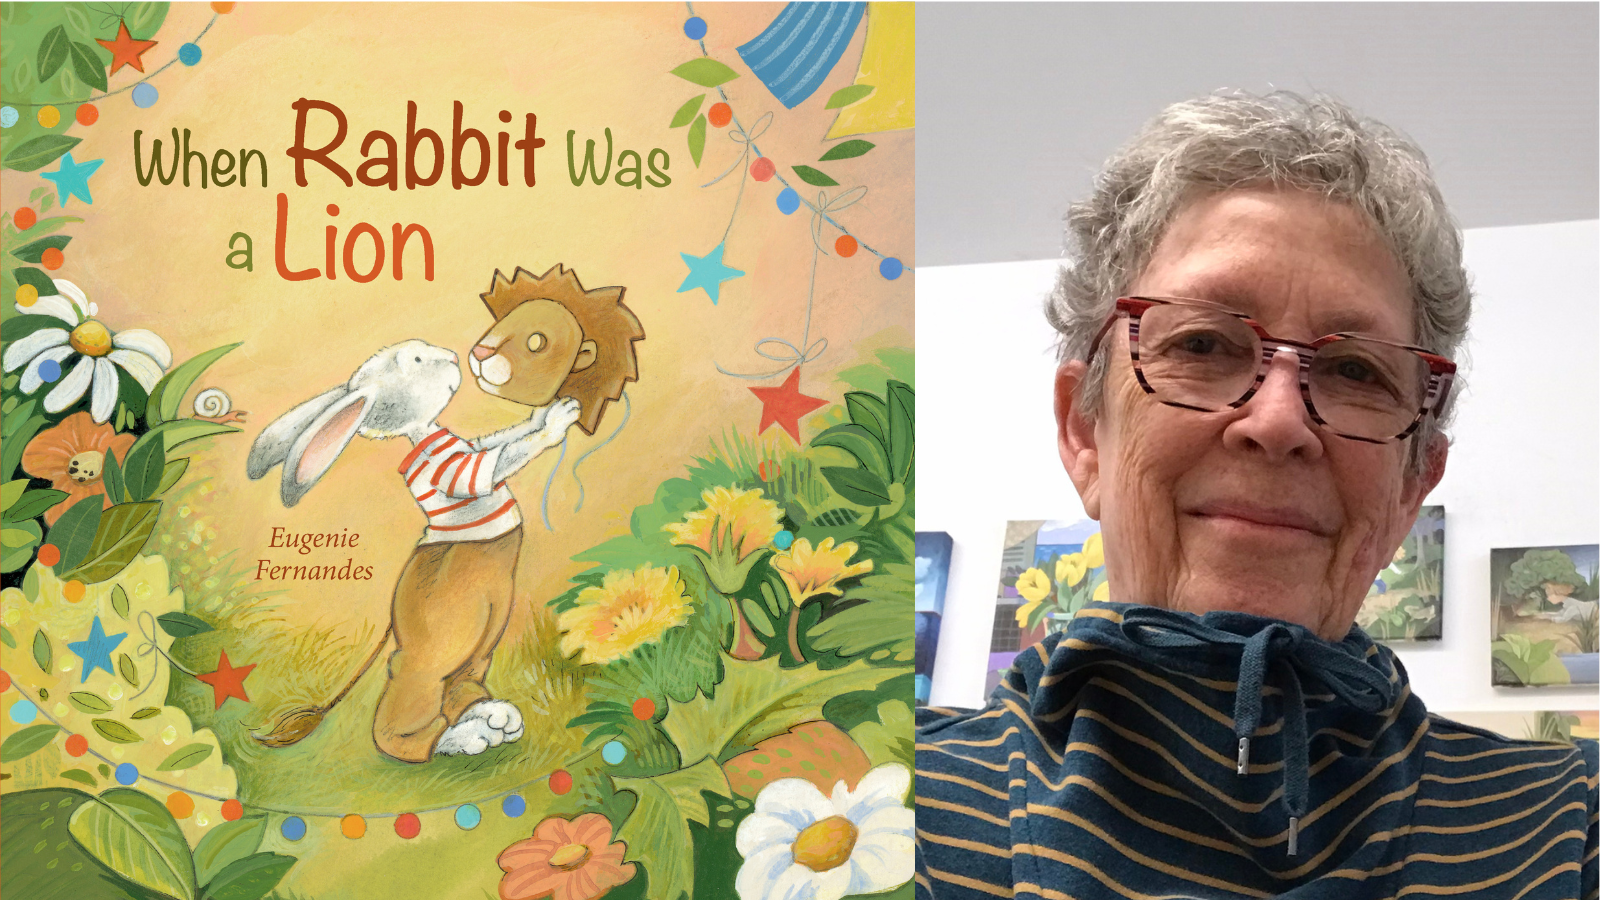 Image of the cover of When Rabbit Was a Lion and headshot of the author and illustrator, Eugenie Fernandes.